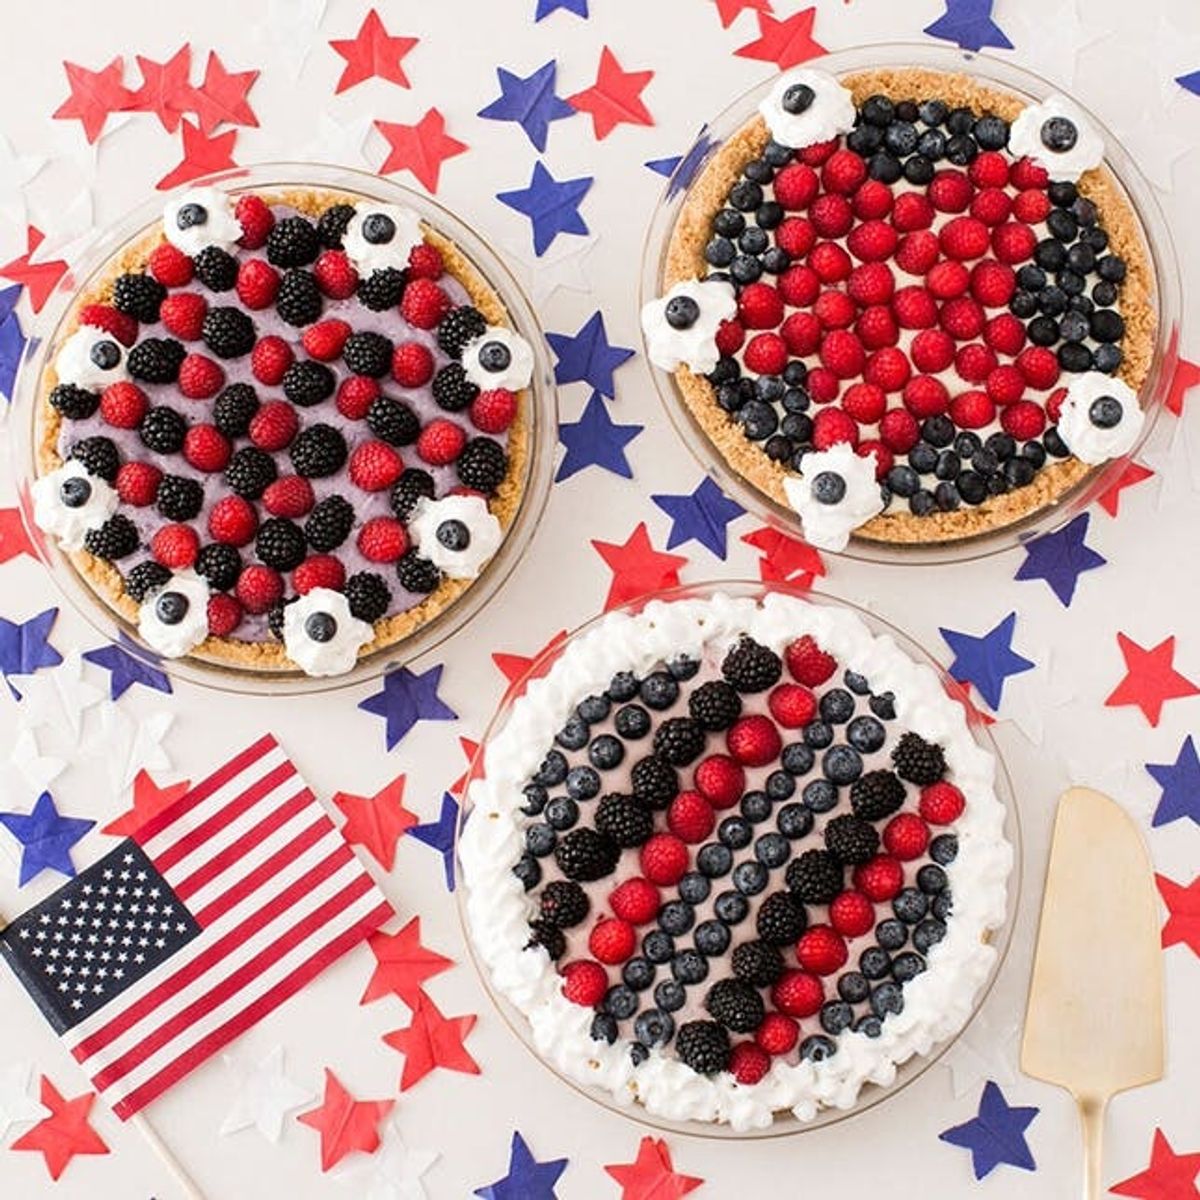 3 No-Bake Pies To Make For The 4th of July desserts